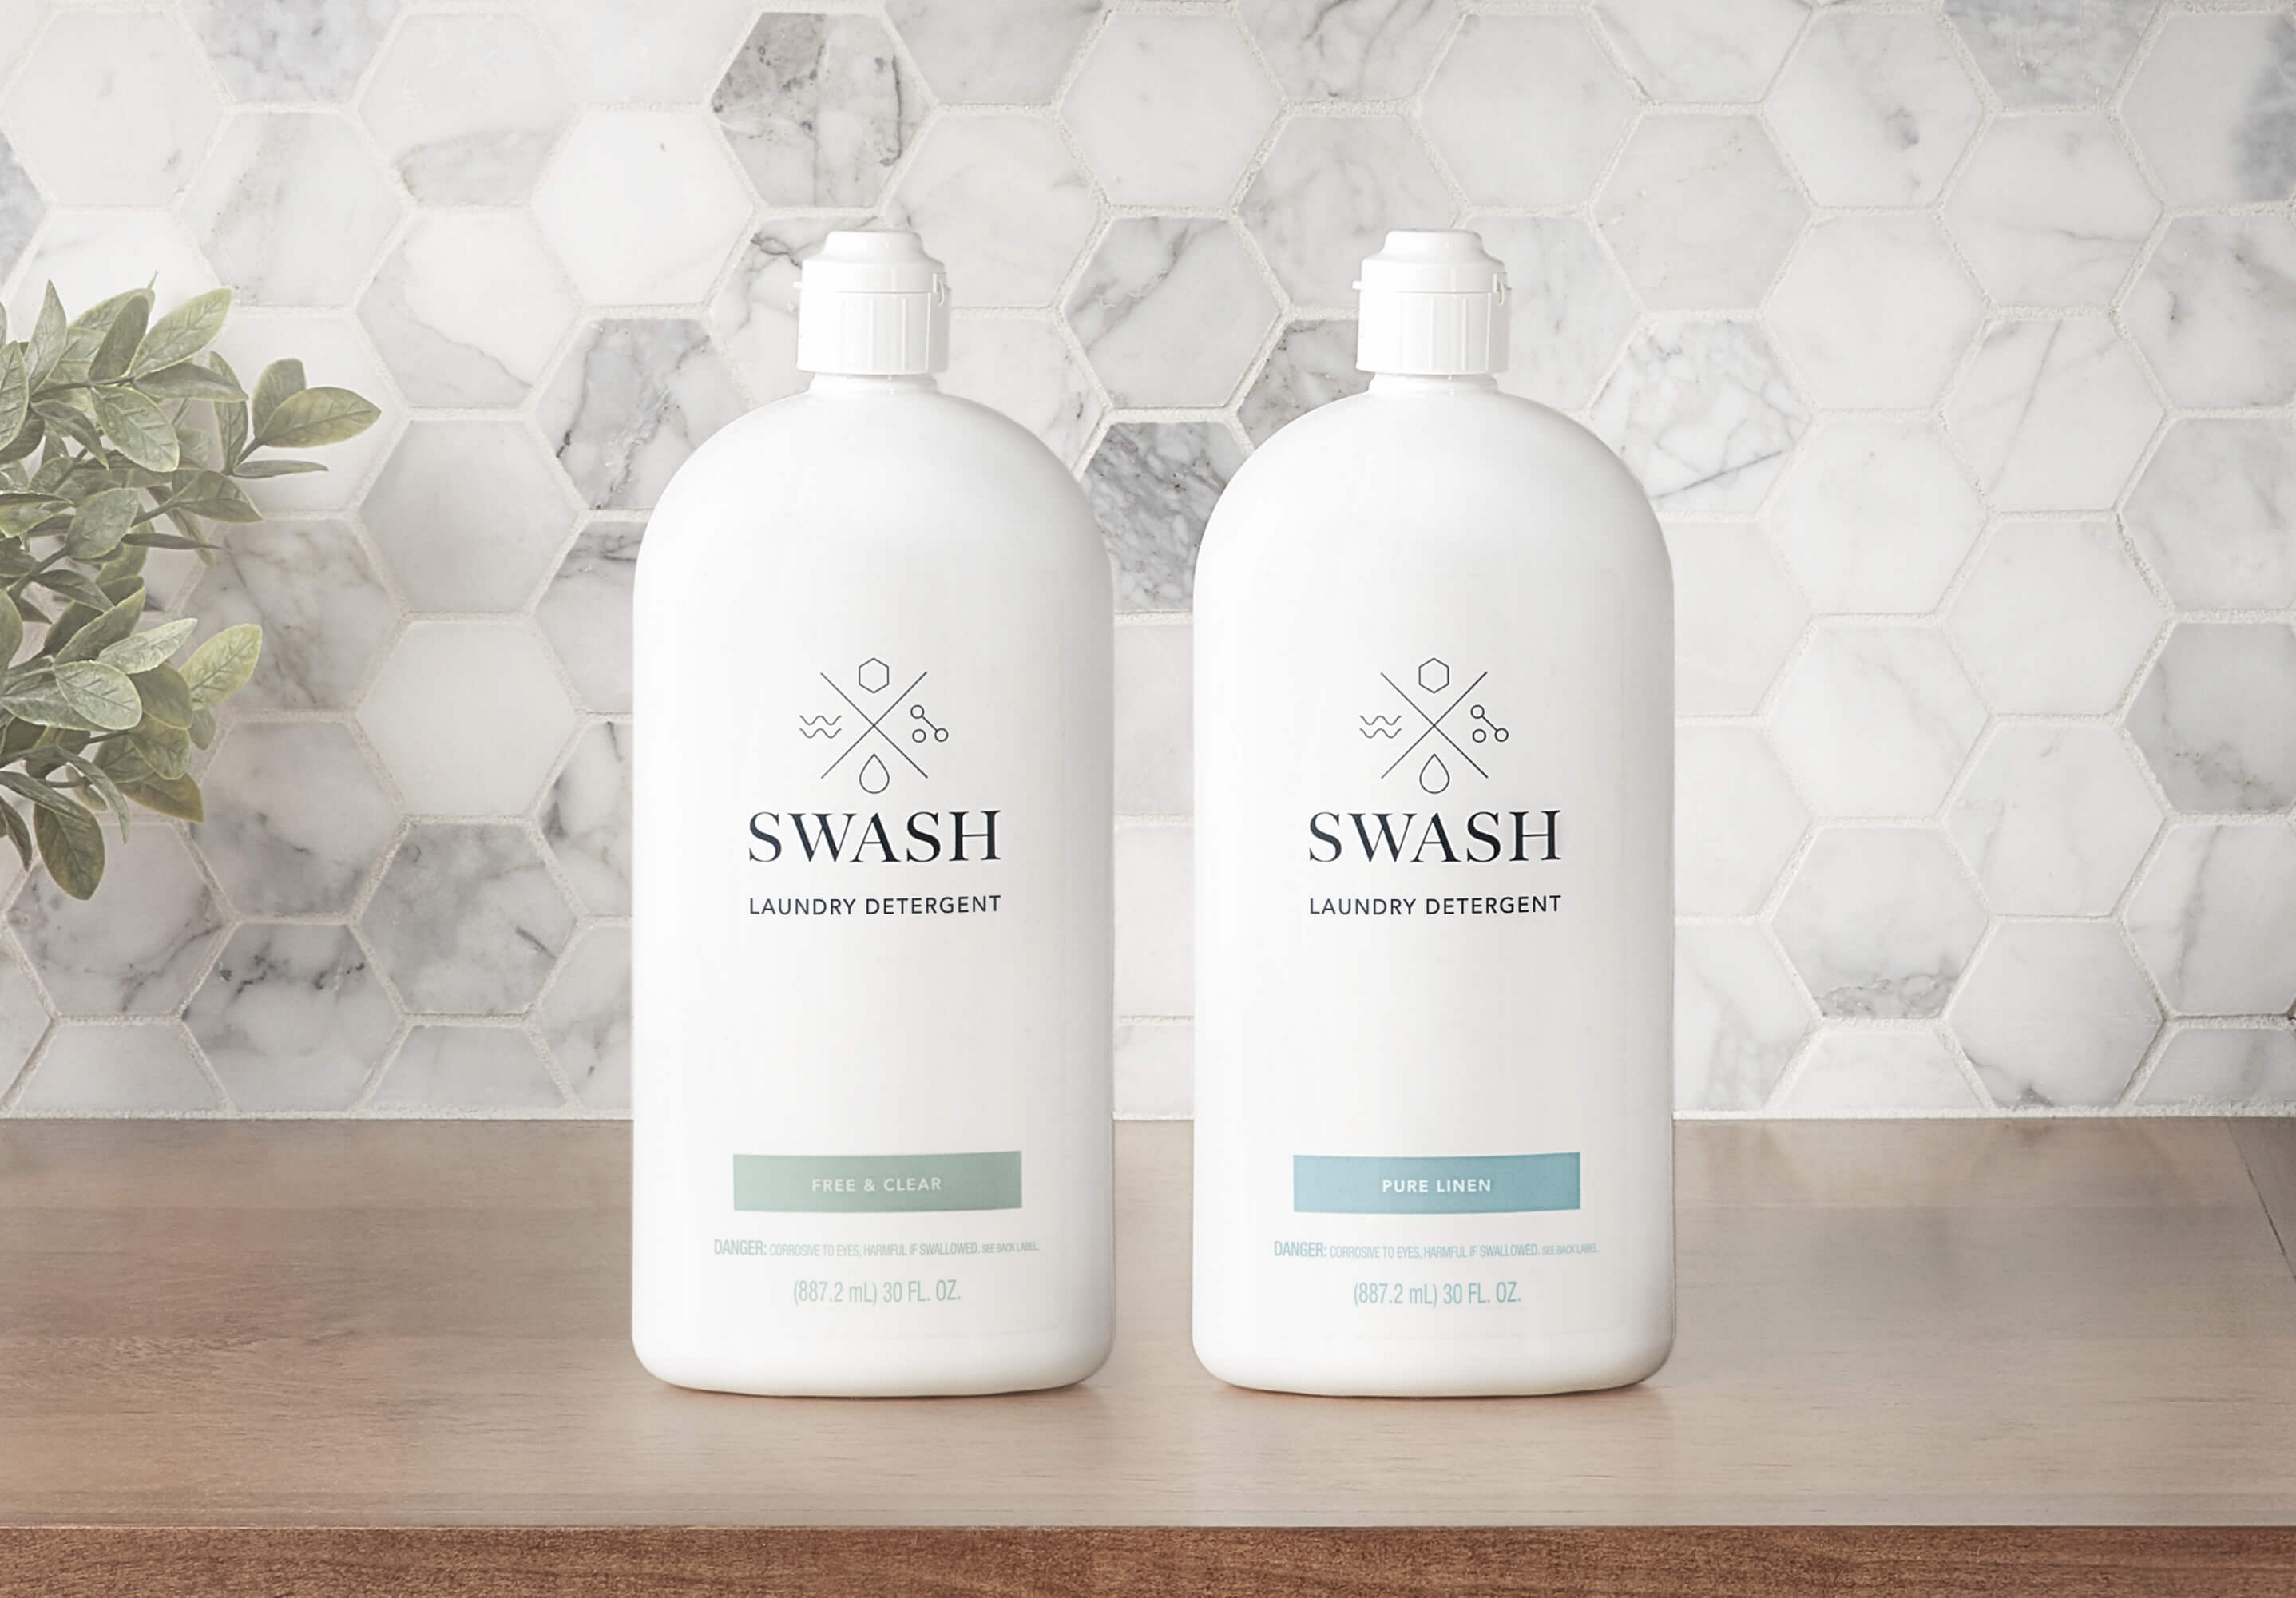 Swash Pure Linen and Free and Clear Laundry Detergent in sleek white bottles on a wooden surface